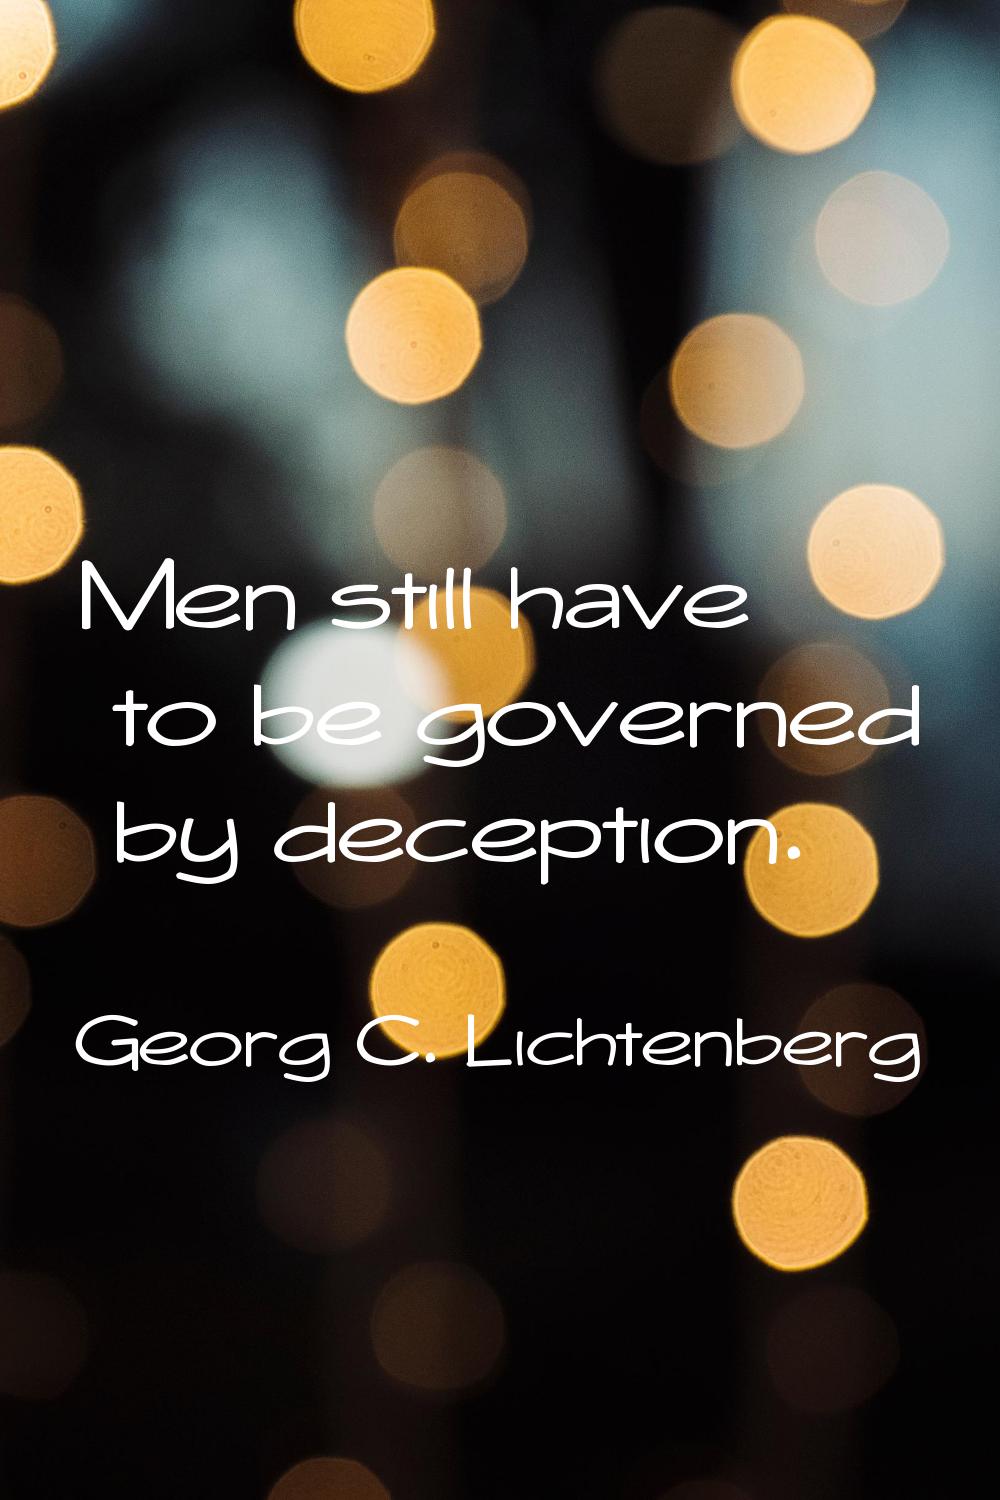 Men still have to be governed by deception.